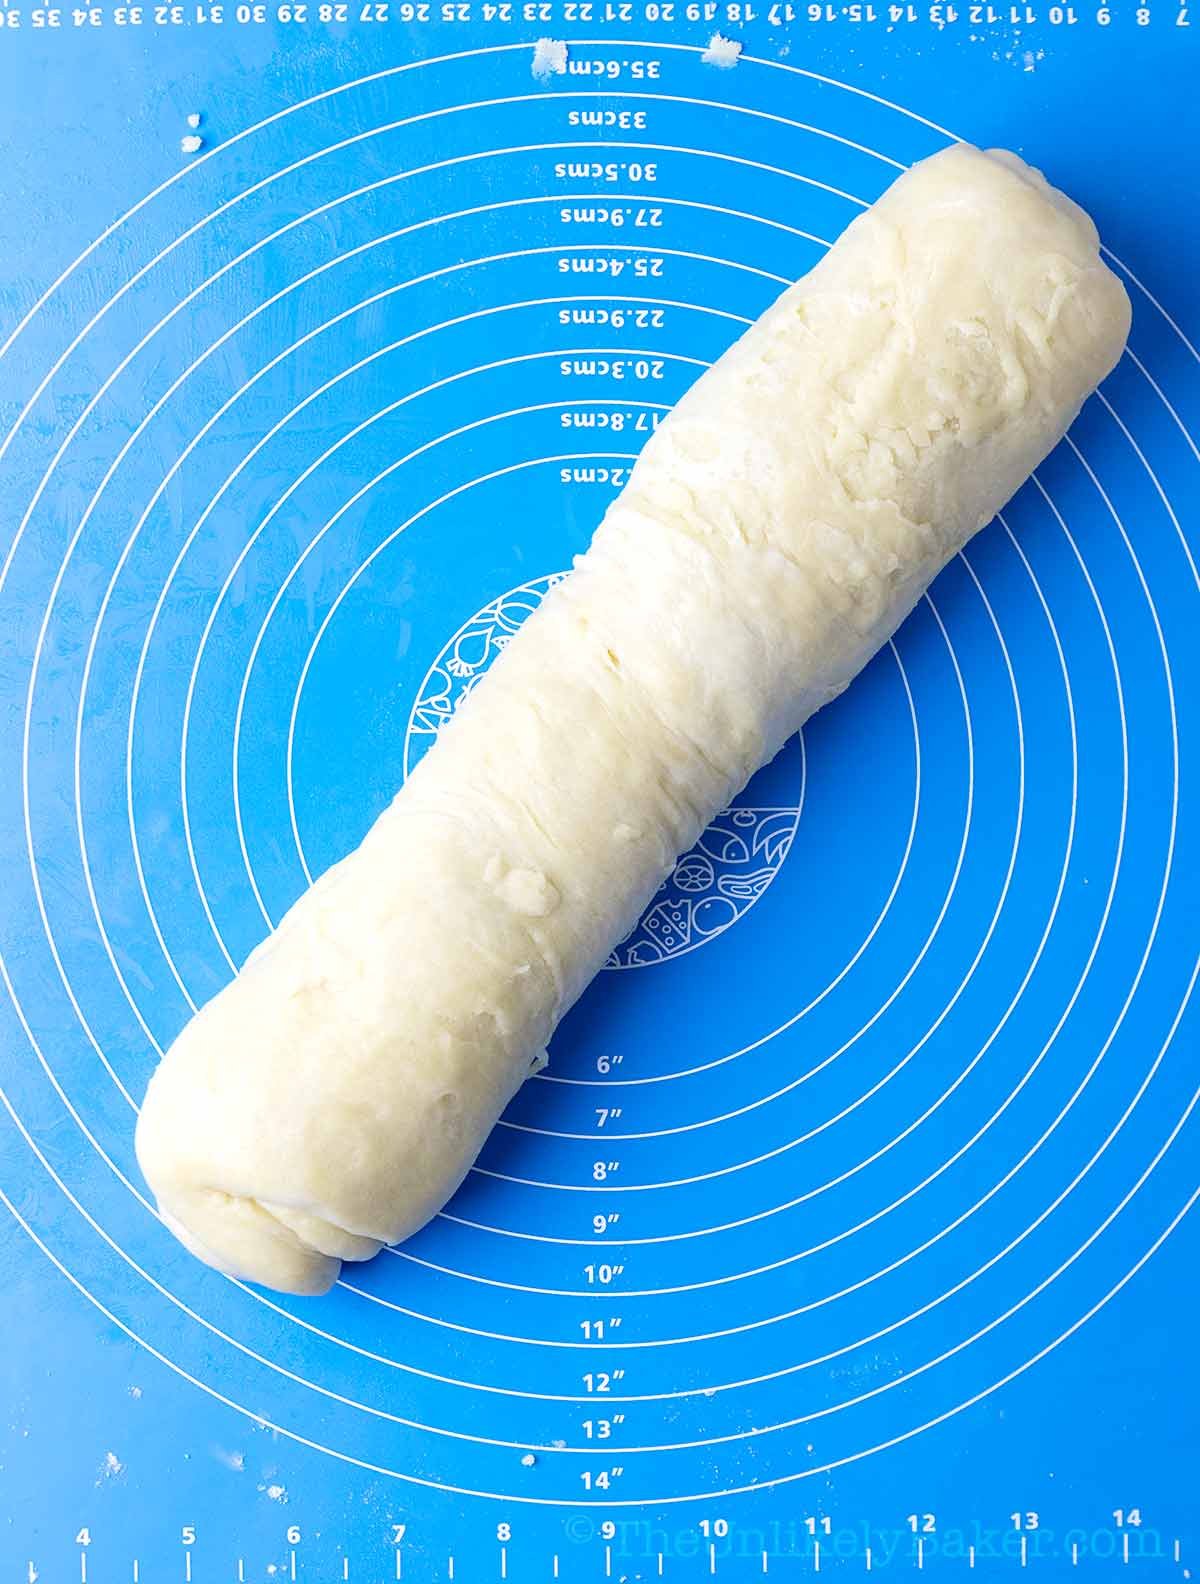 Rolled hopia dough.